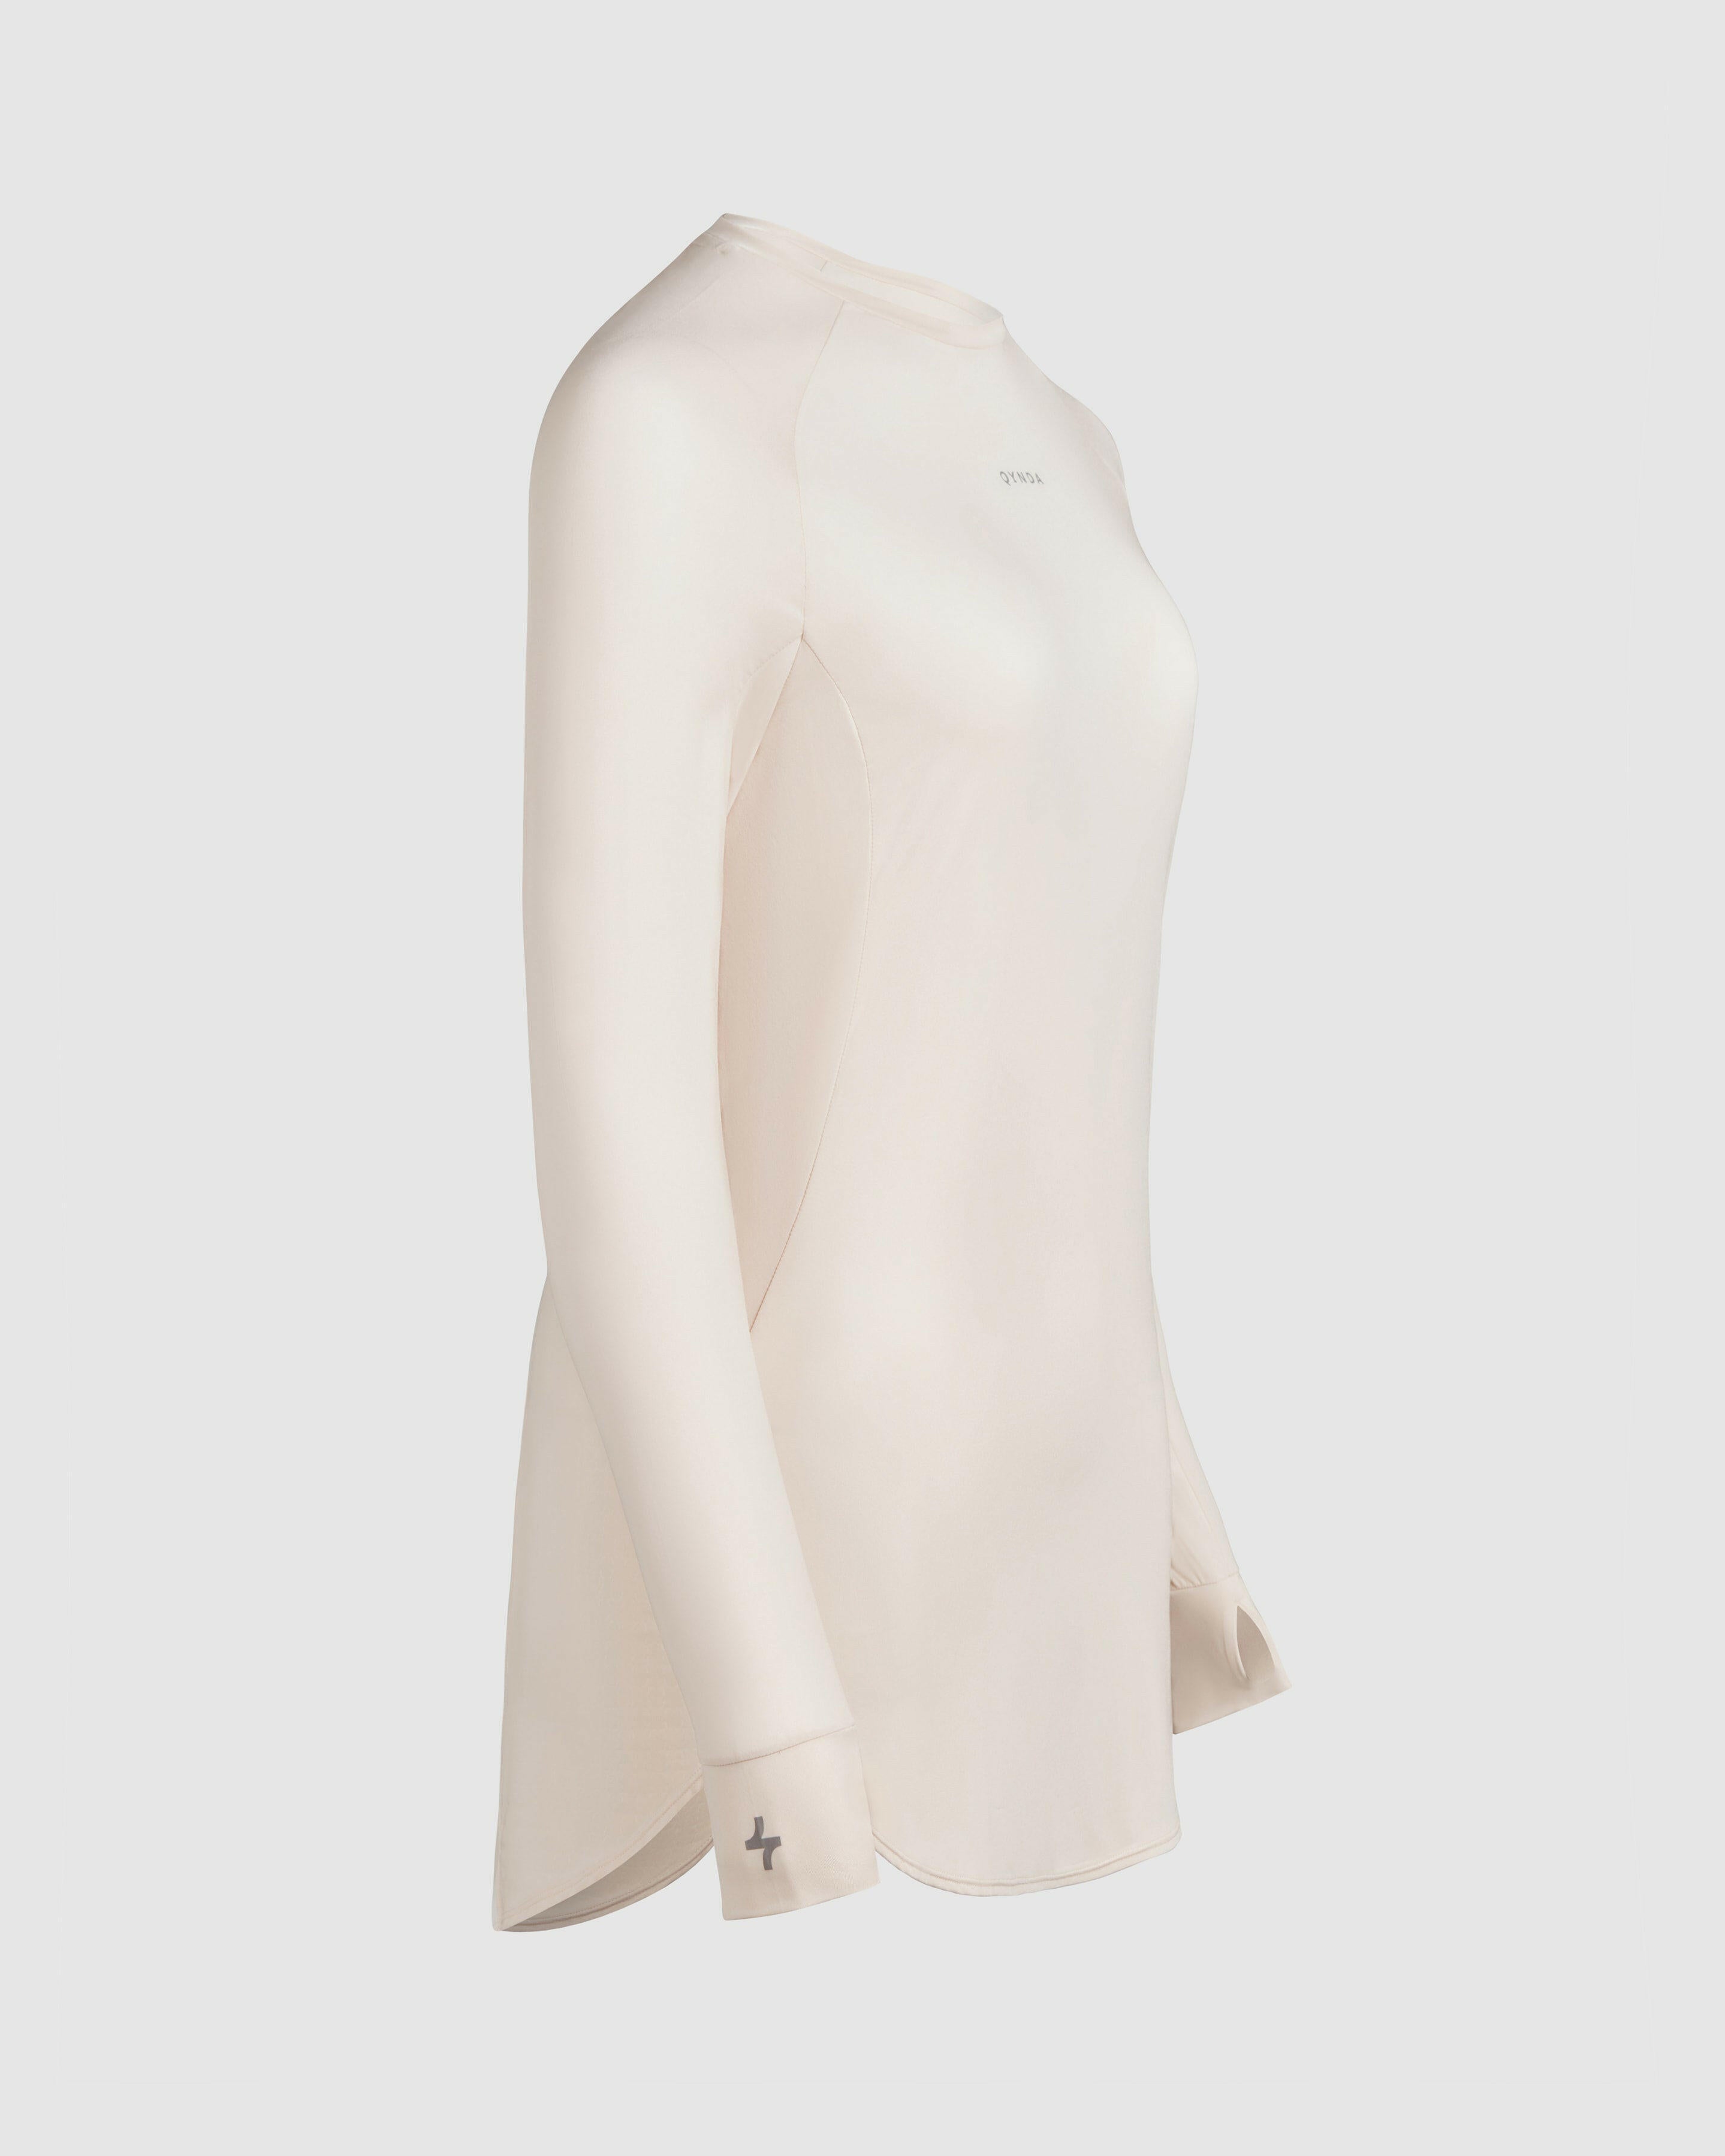 A modest shell MOD LONG SLEEVE T-SHIRT by Qynda on a mannequin featuring an extra long-sleeve design with a high neckline.